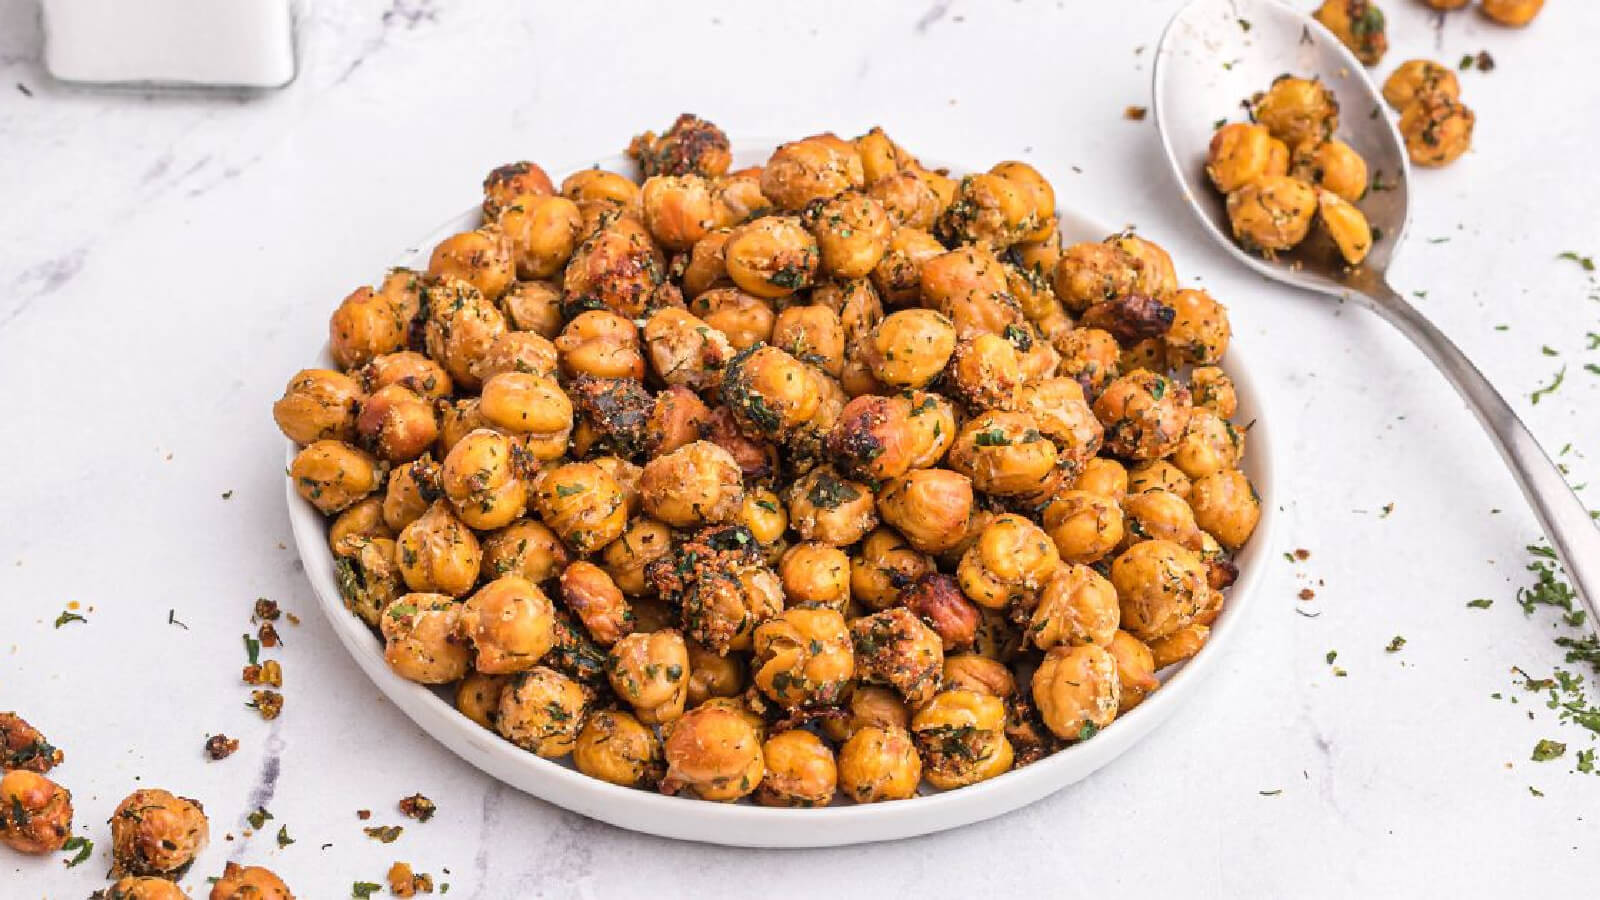 crispy chickpeas on a white plate with some on a spoon in the background.